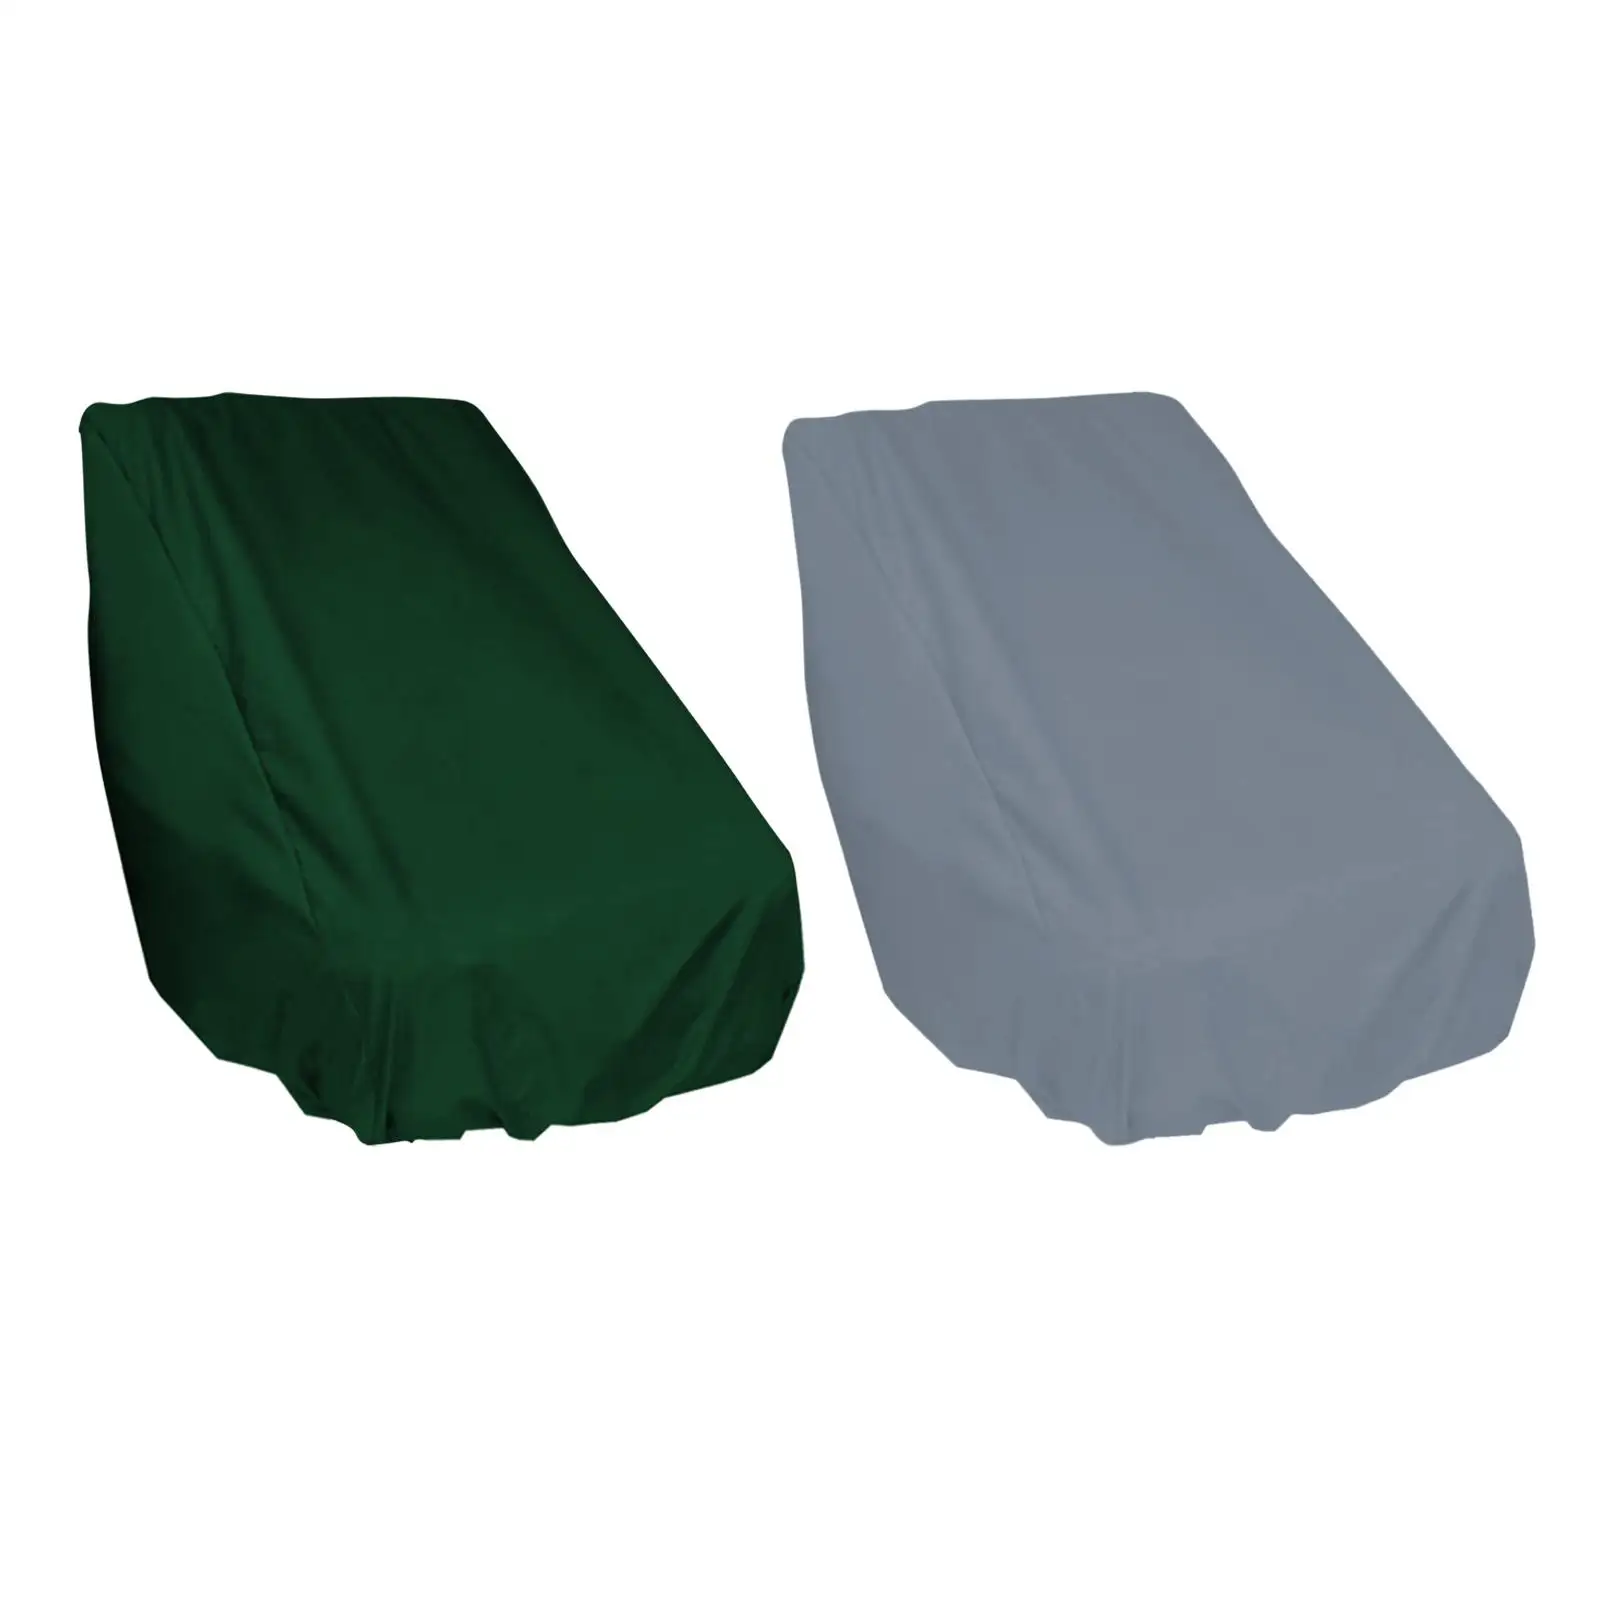 Boat Seat Cover Weather Resistant Heavy Duty Oxford Fabric Boat Bench Chair Seat Cover Outdoor Helm Chair Protective Covers